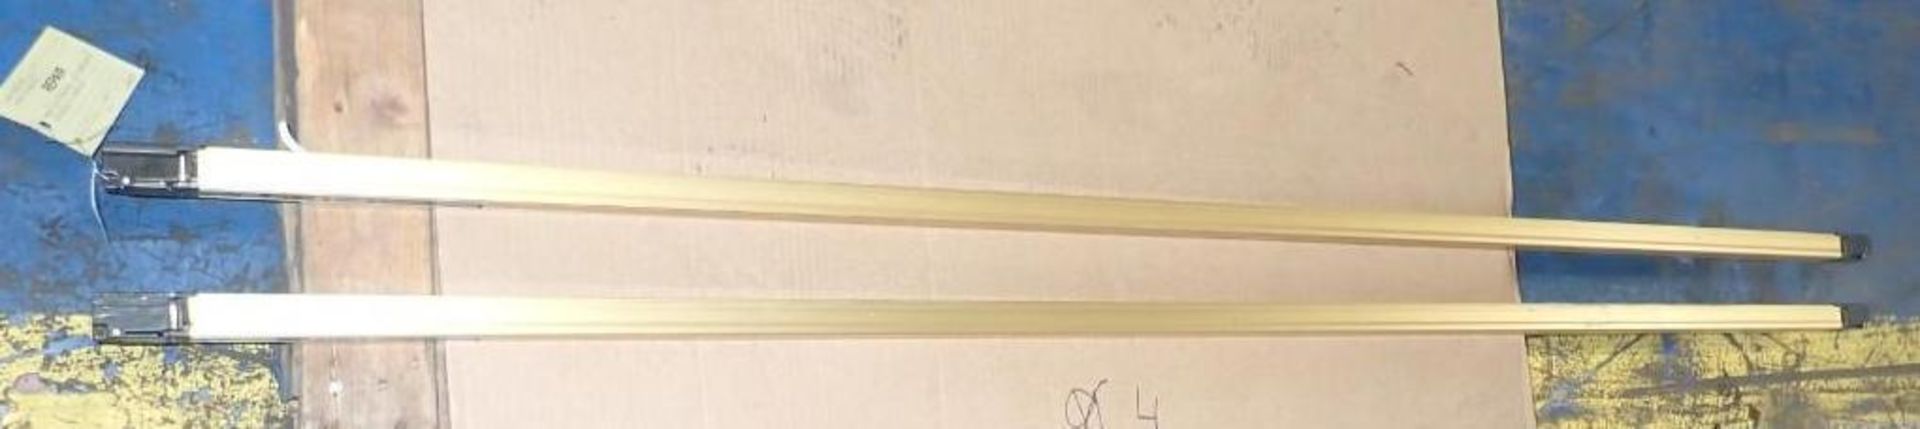 Lot of (2) Safety Light Curtain Units